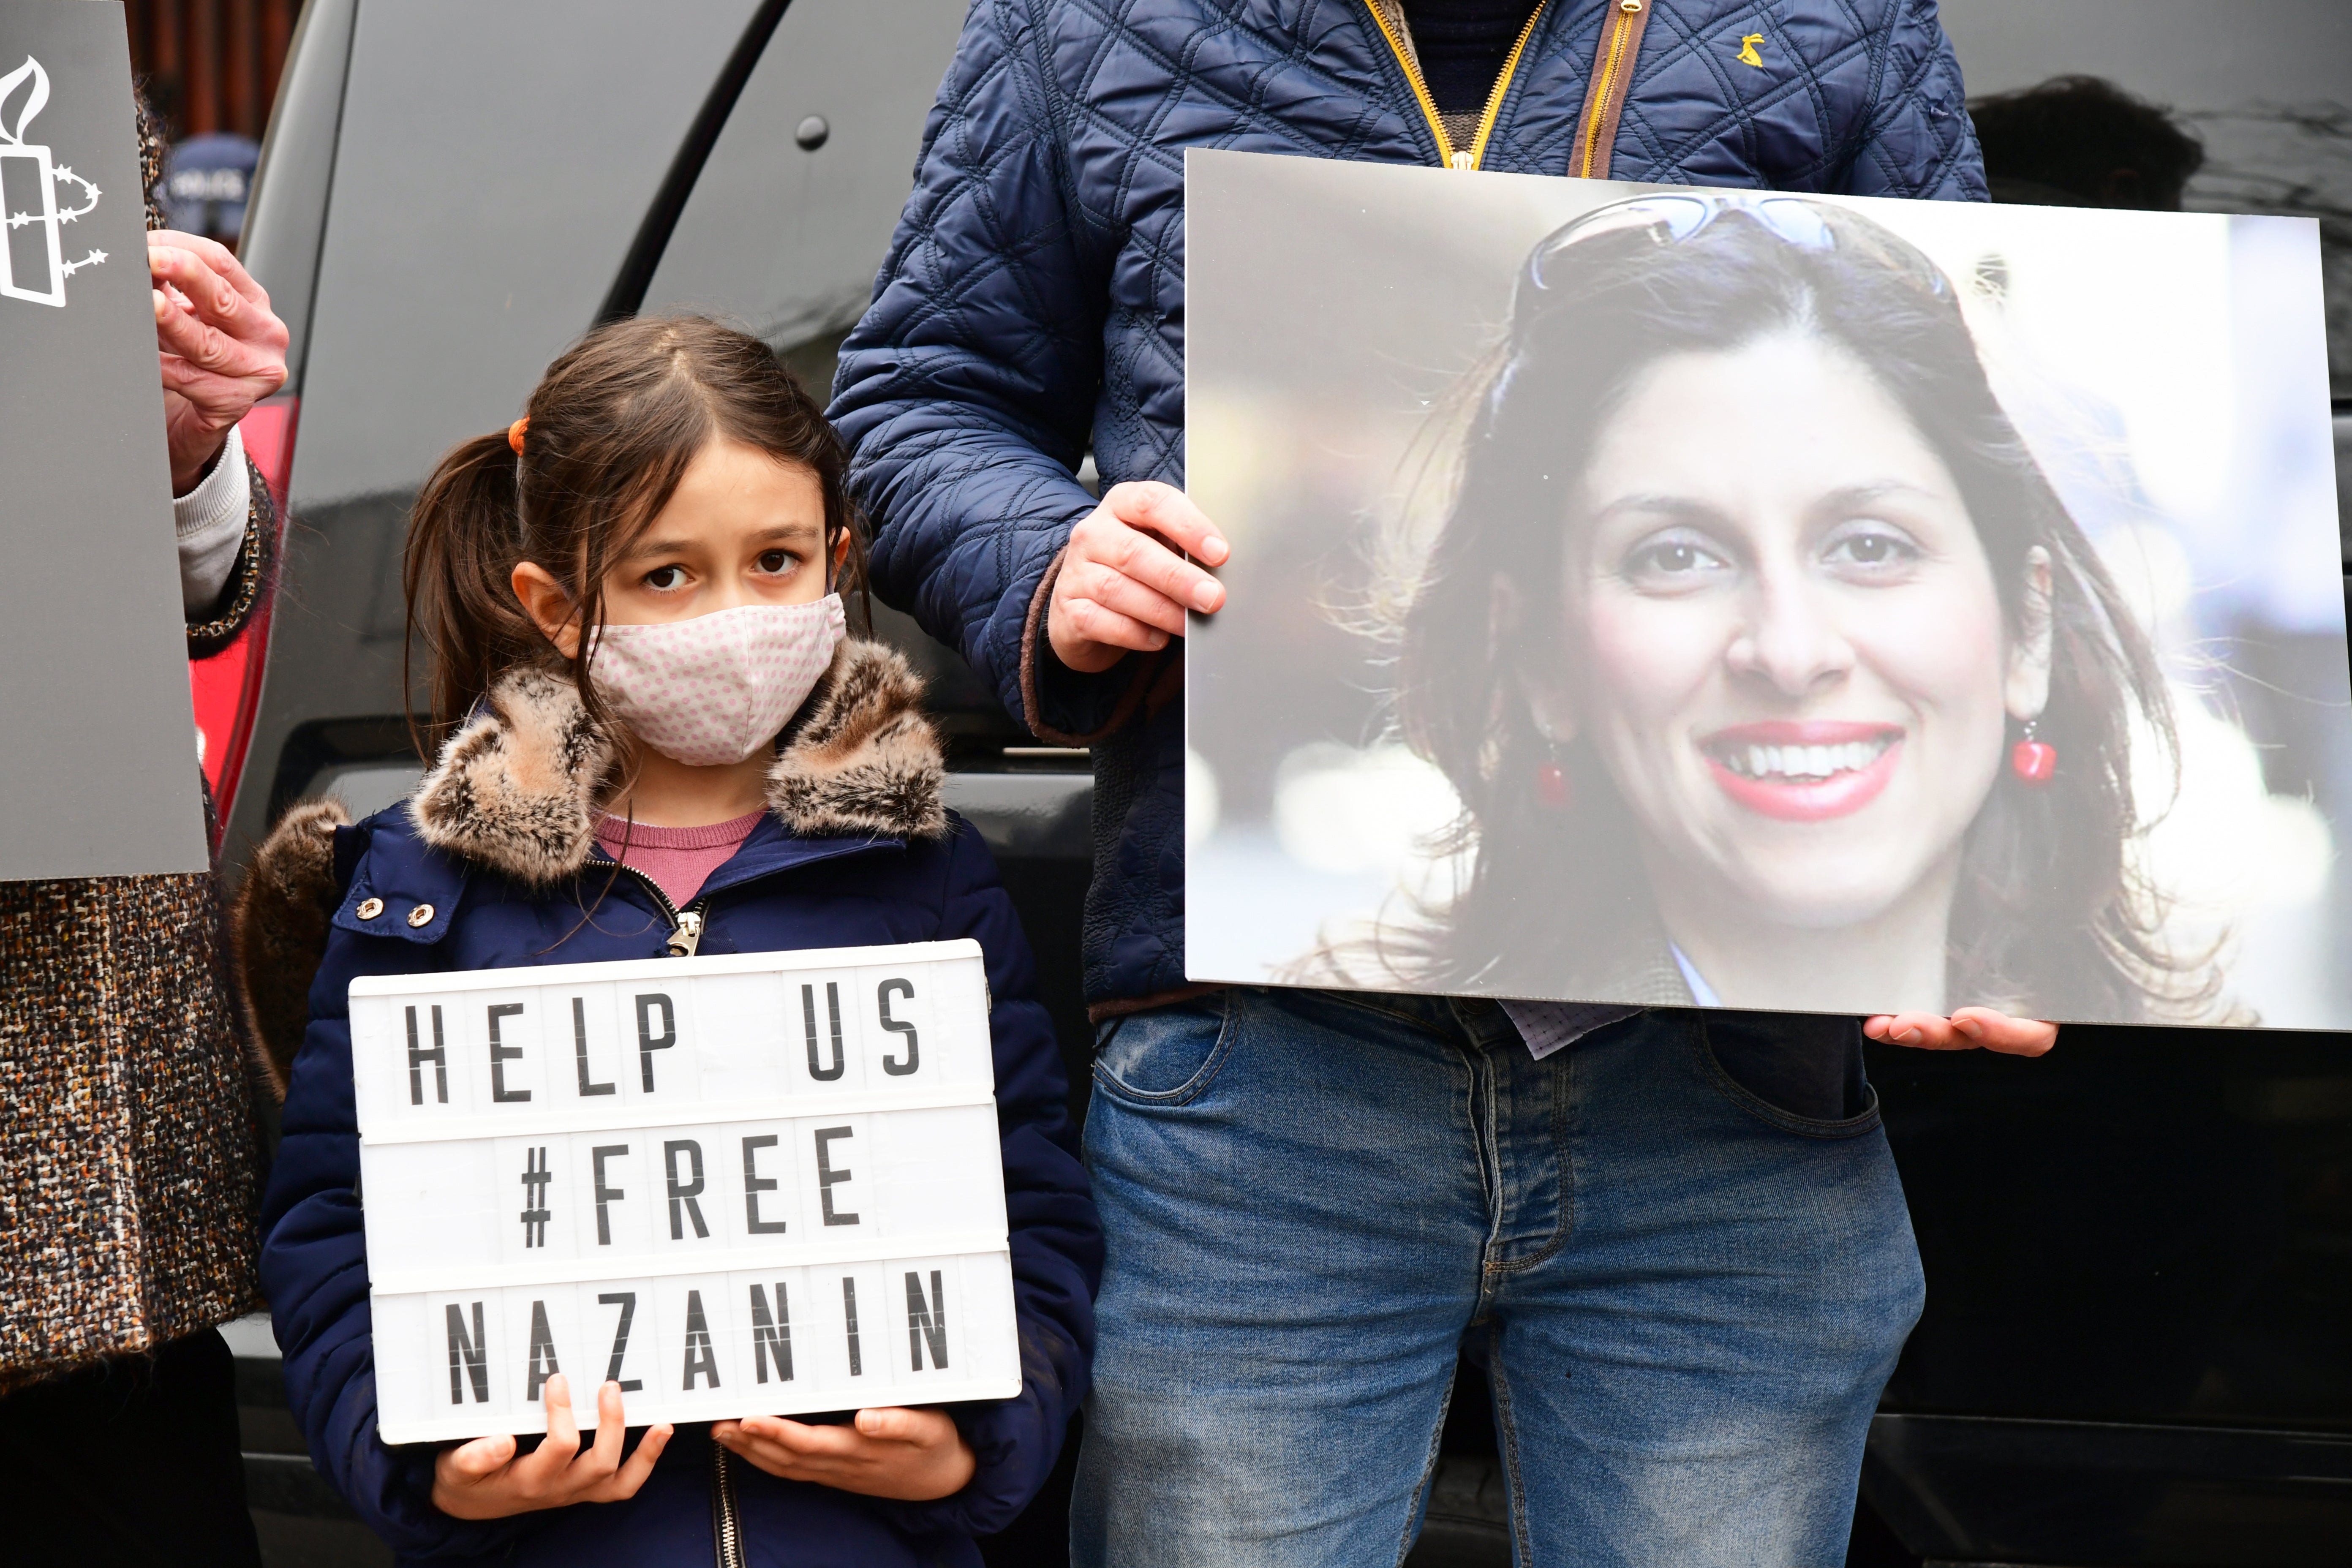 Nazanin Zaghari-Ratcliffe’s young daughter Gabriella campaigns for her mother to be freed